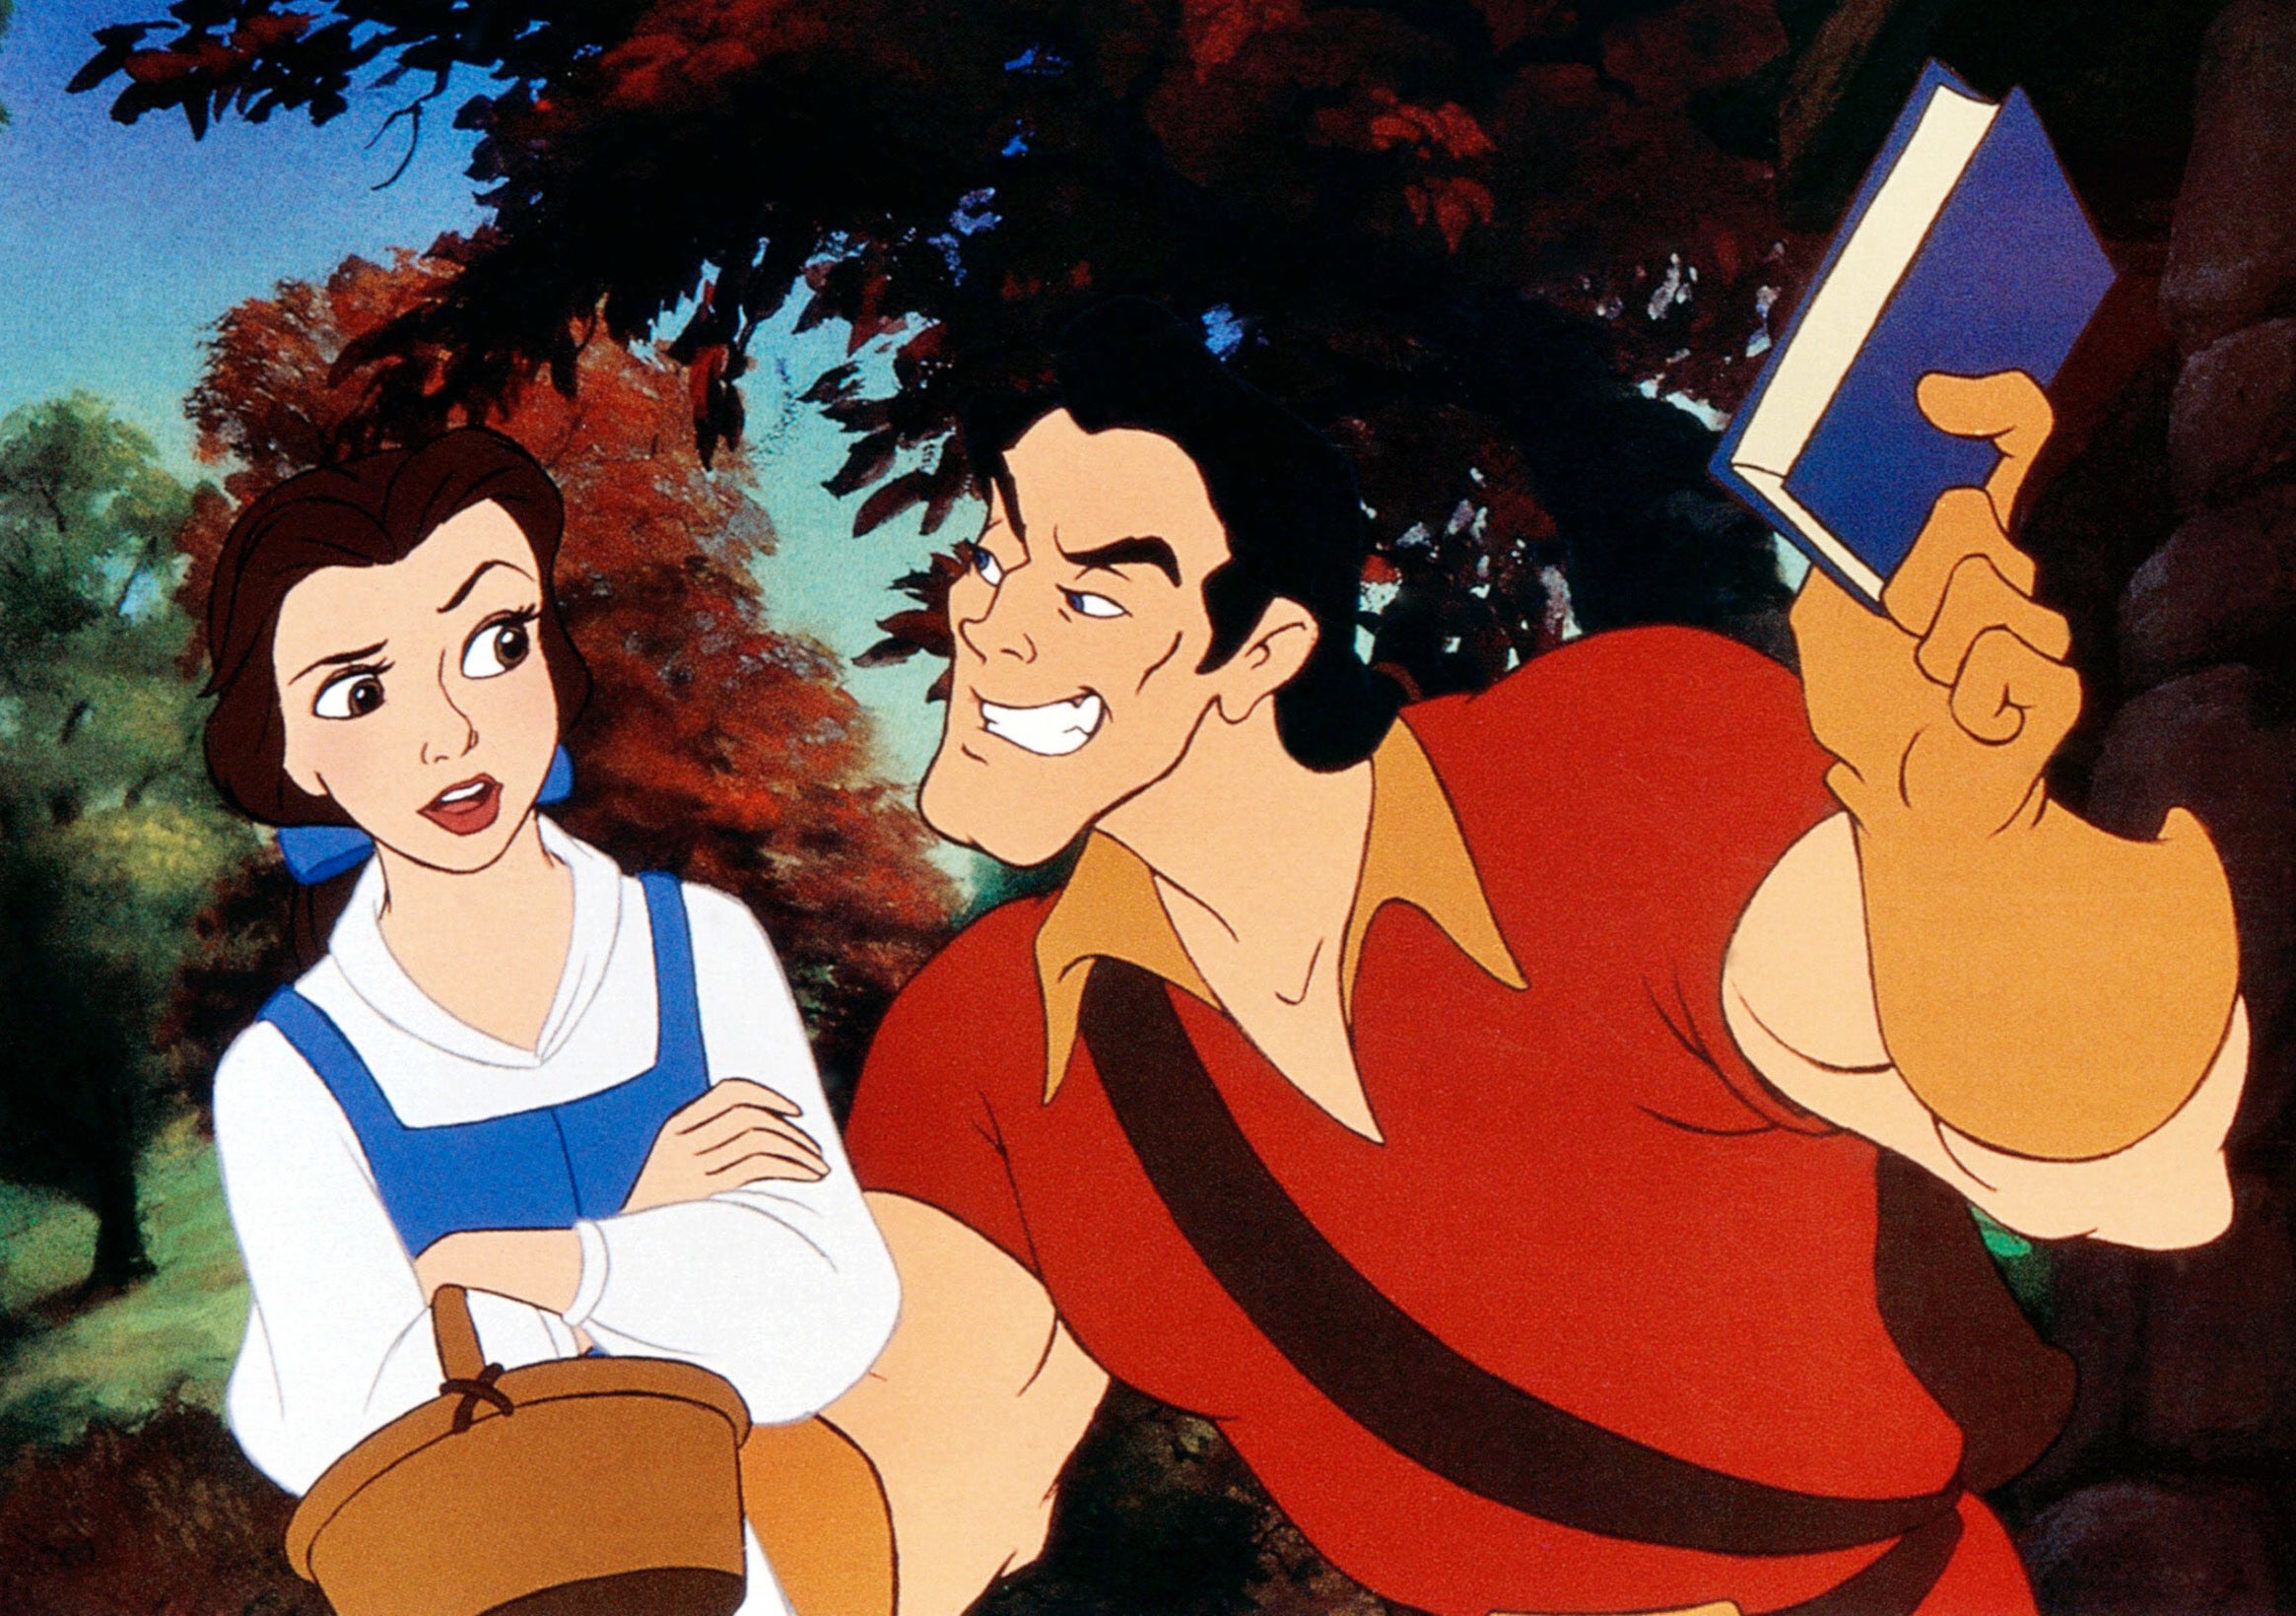 Belle and Gaston in the animated version of Beauty and the Beast